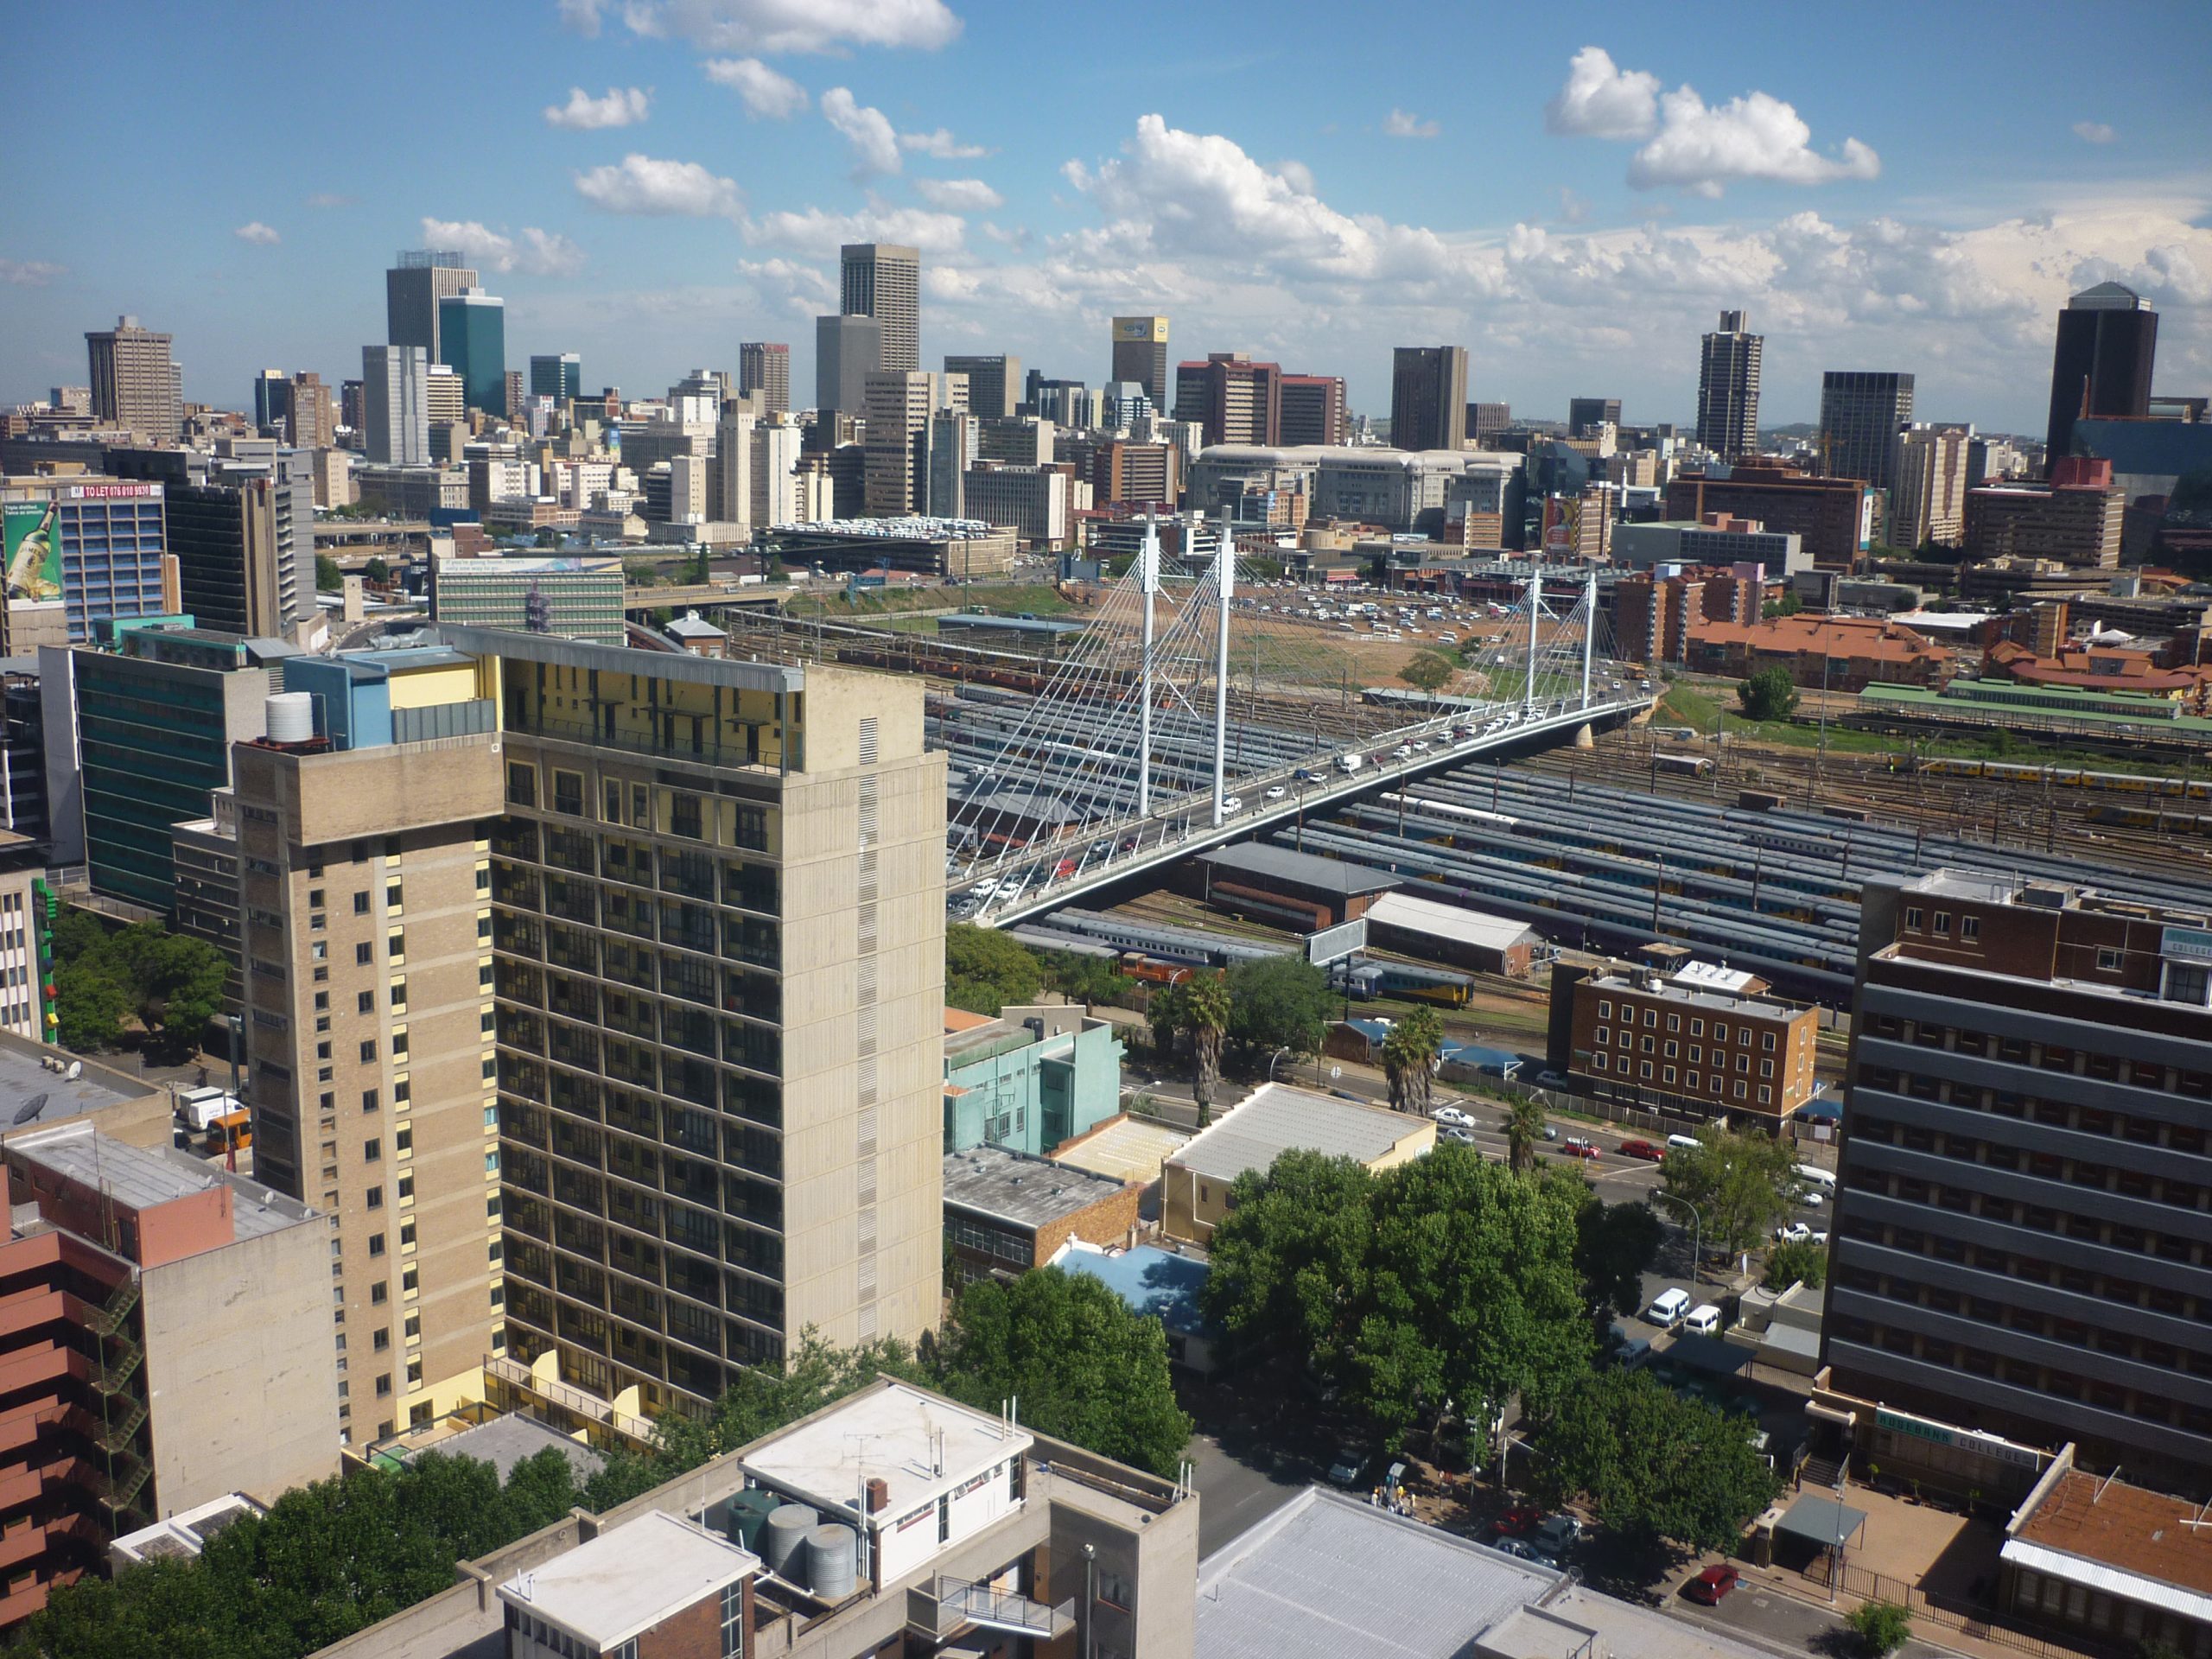 Most Developed Cities In Africa